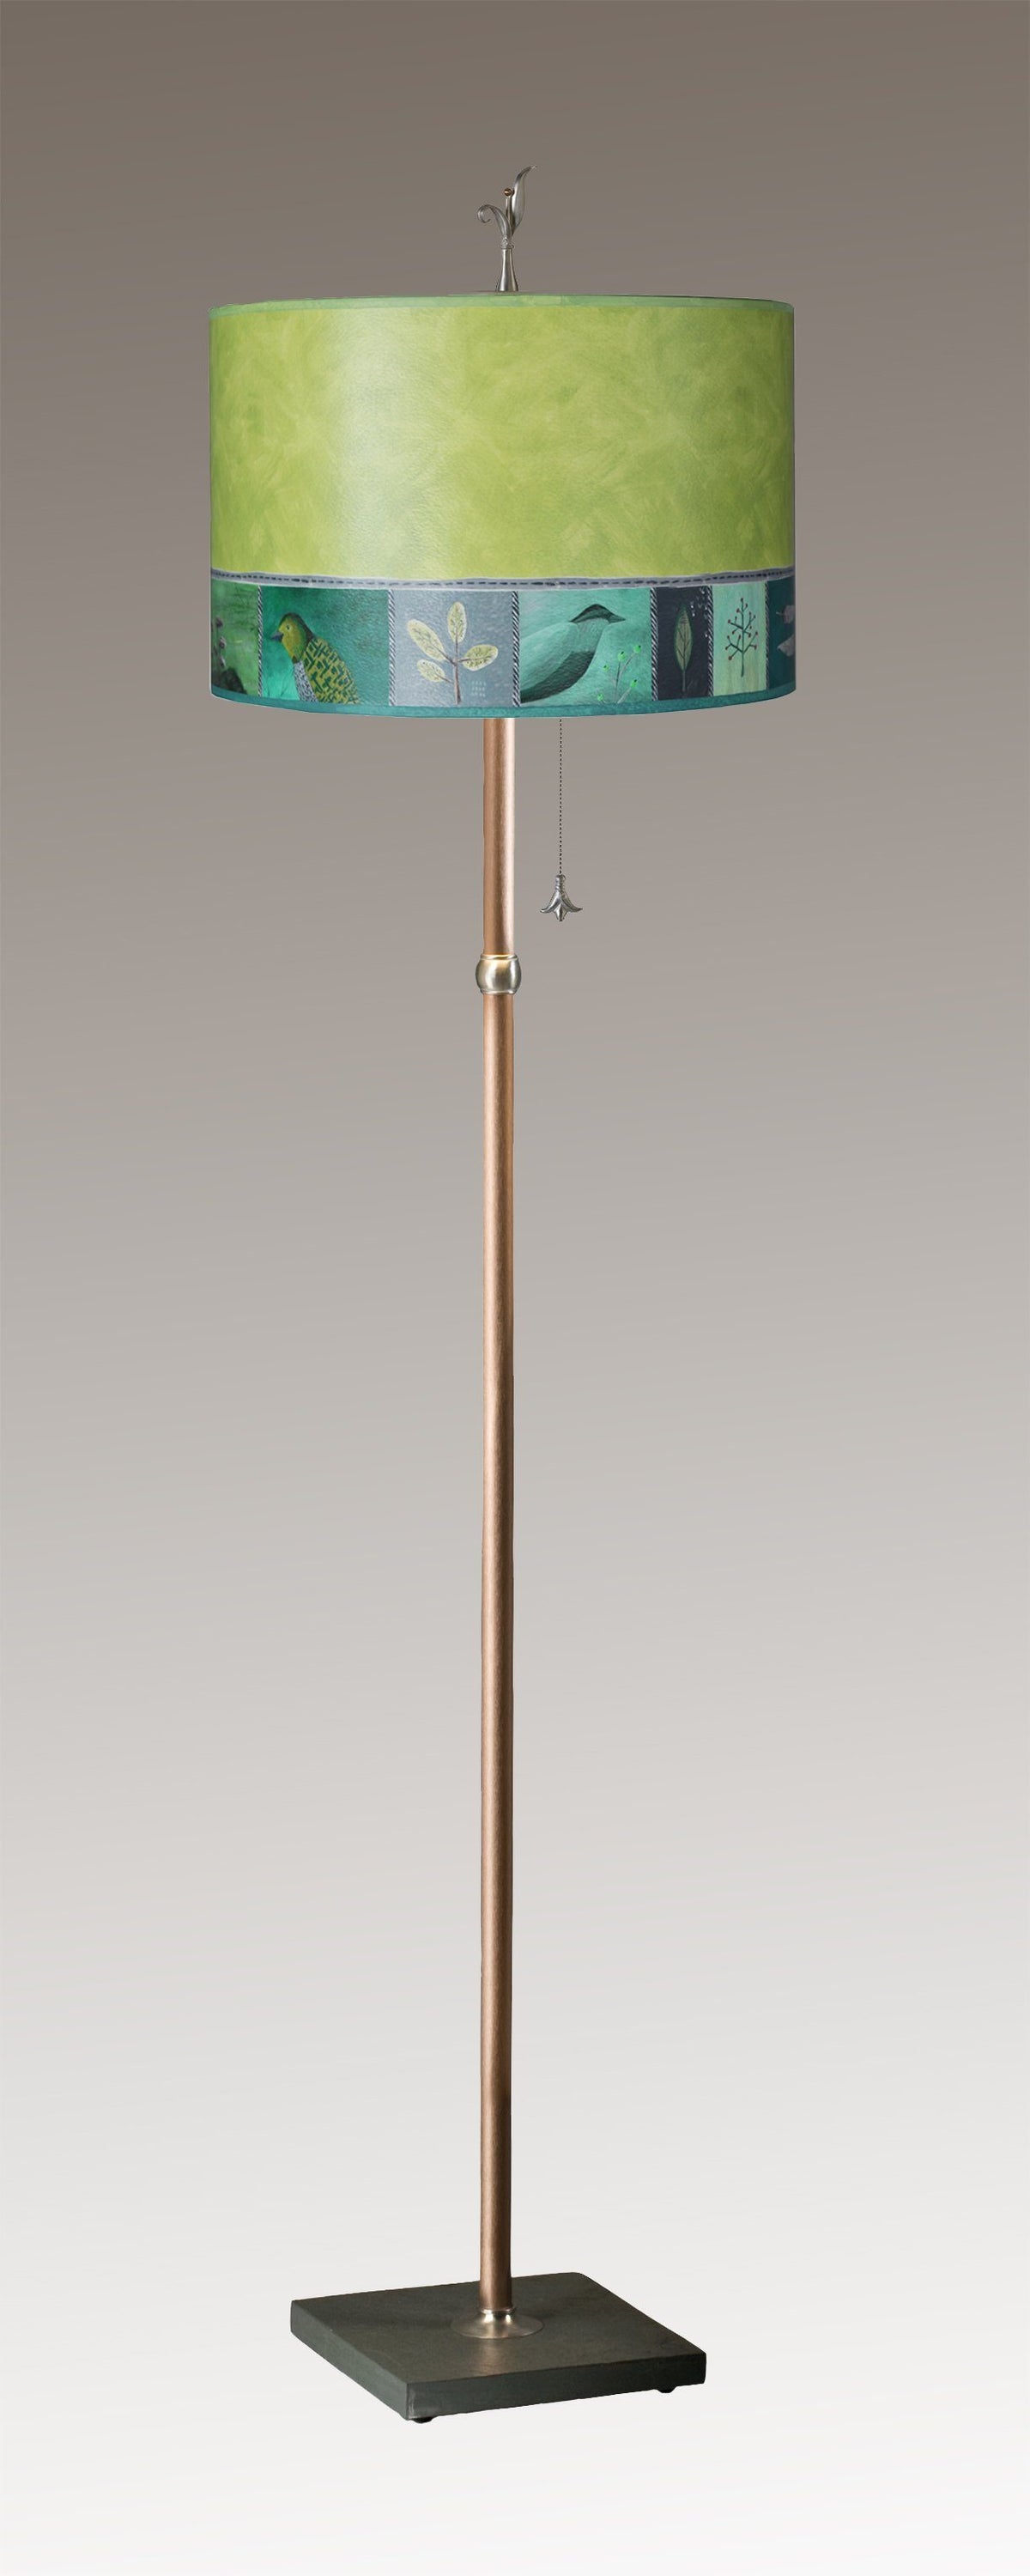 Janna Ugone &amp; Co Floor Lamps Copper Floor Lamp with Large Drum Shade in Woodland Trails in Leaf